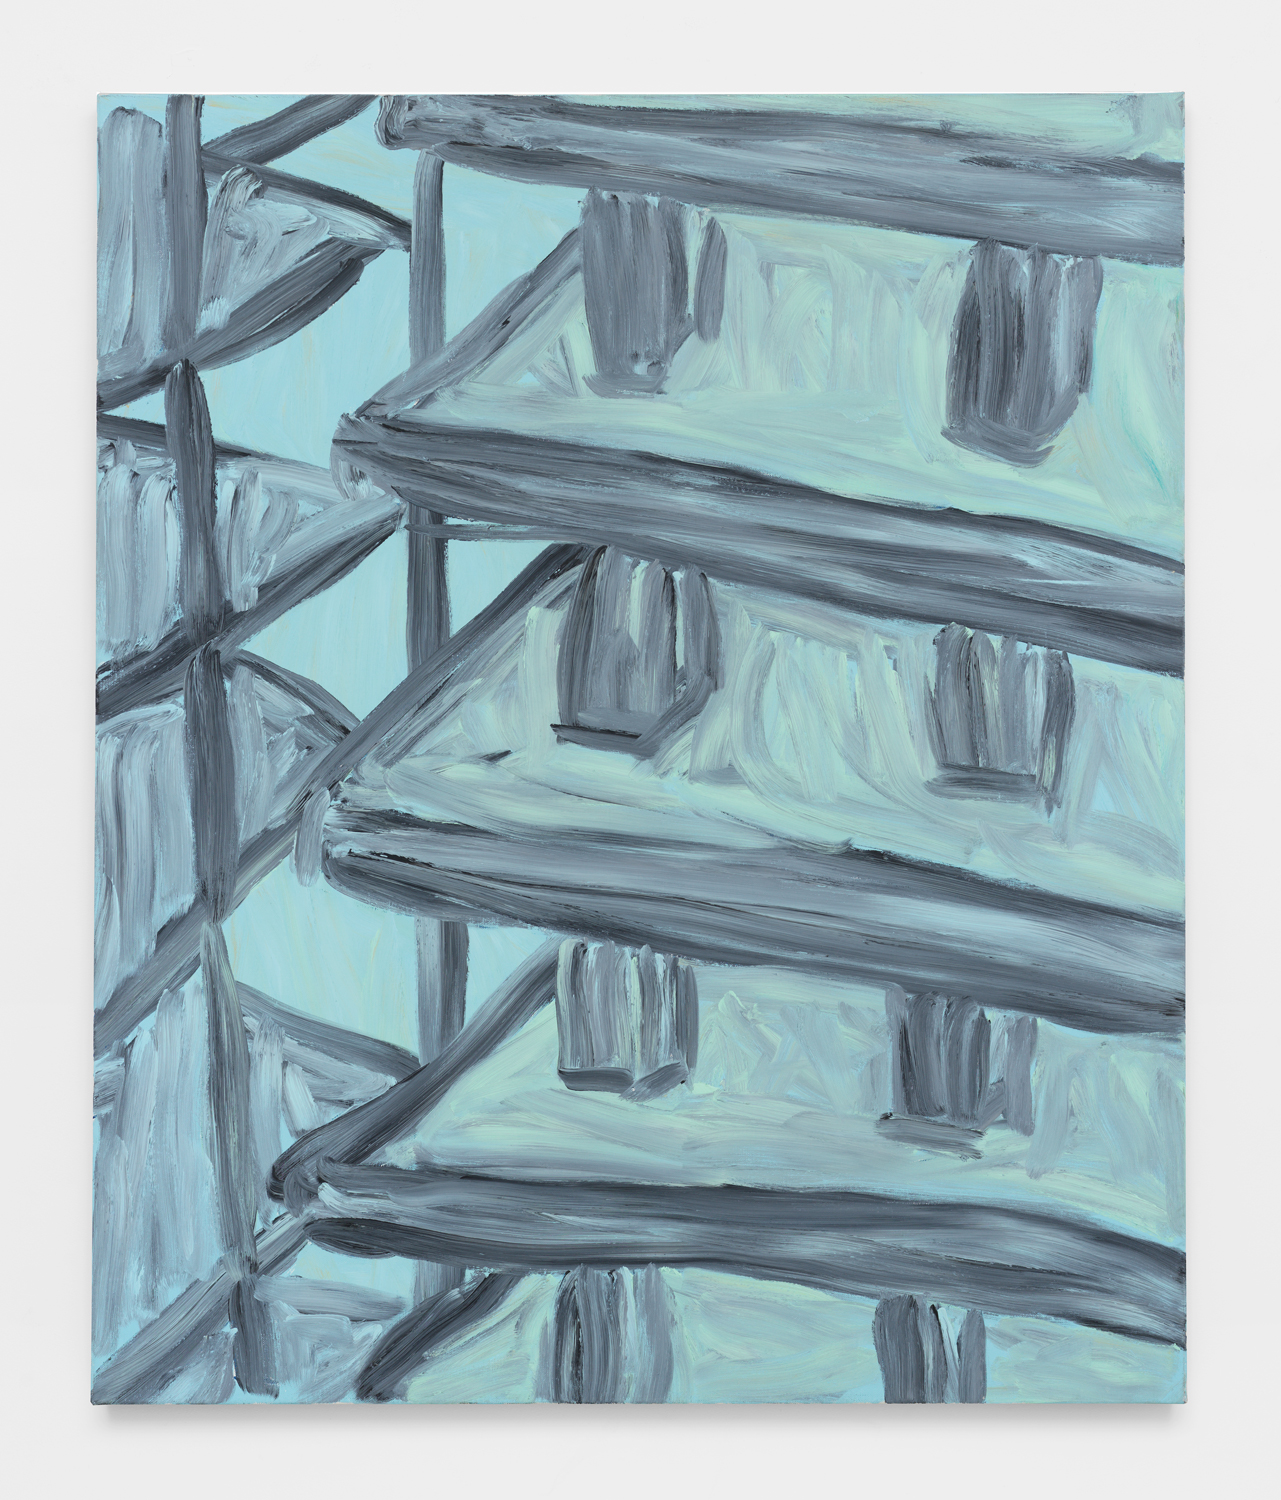 Martha Diamond, Pale Blue Construction, 1985, Oil on linen, 72h x 60w in, Exhibited at Independent NY, Magenta Plains, New York, NY, September 9–12, 2021.